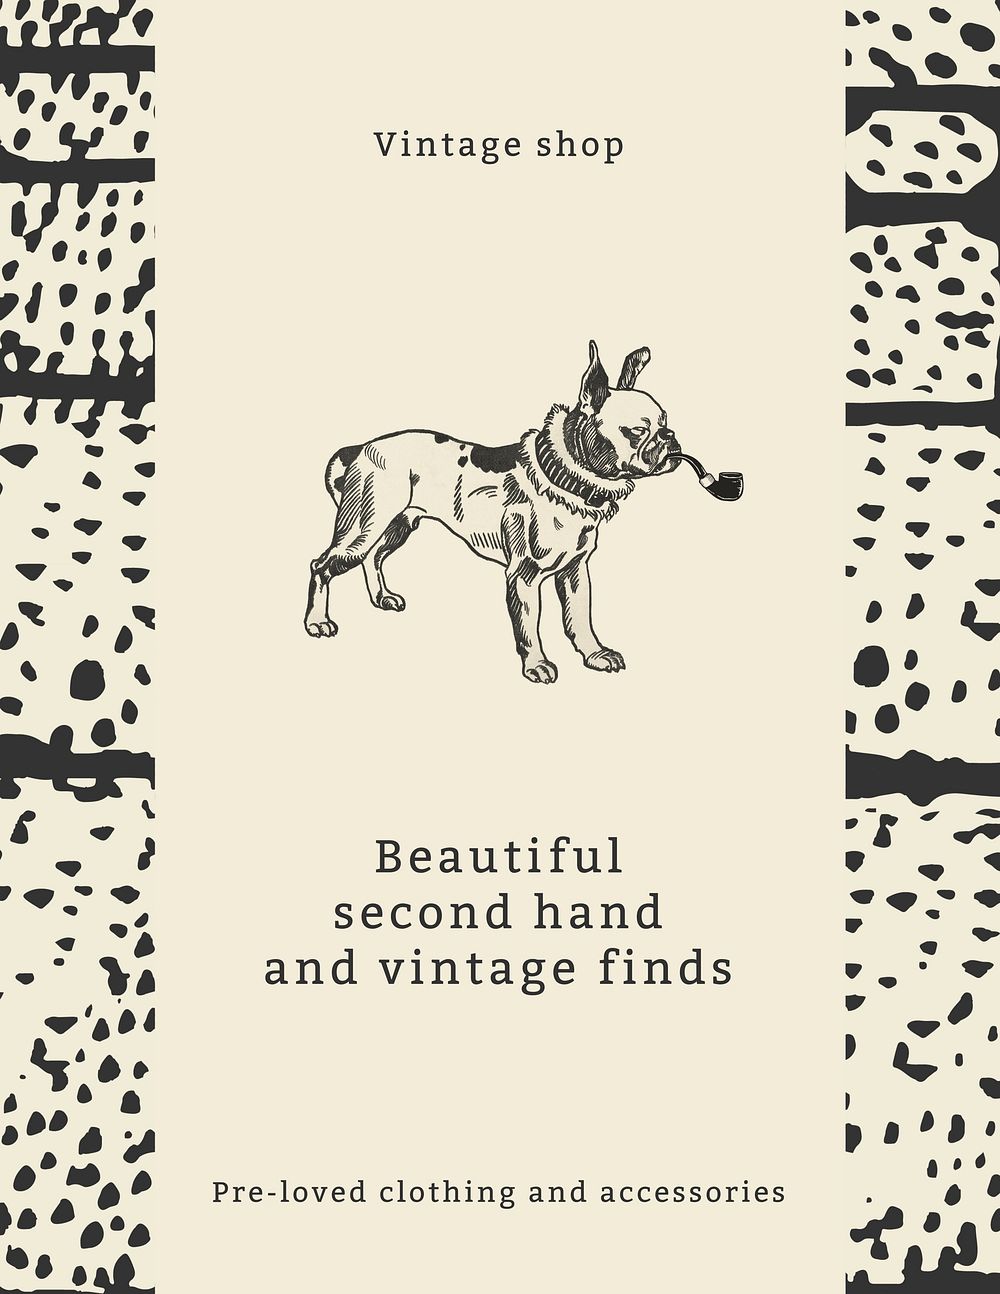 Vintage fashion template, dog design remixed from artworks by Moriz Jung